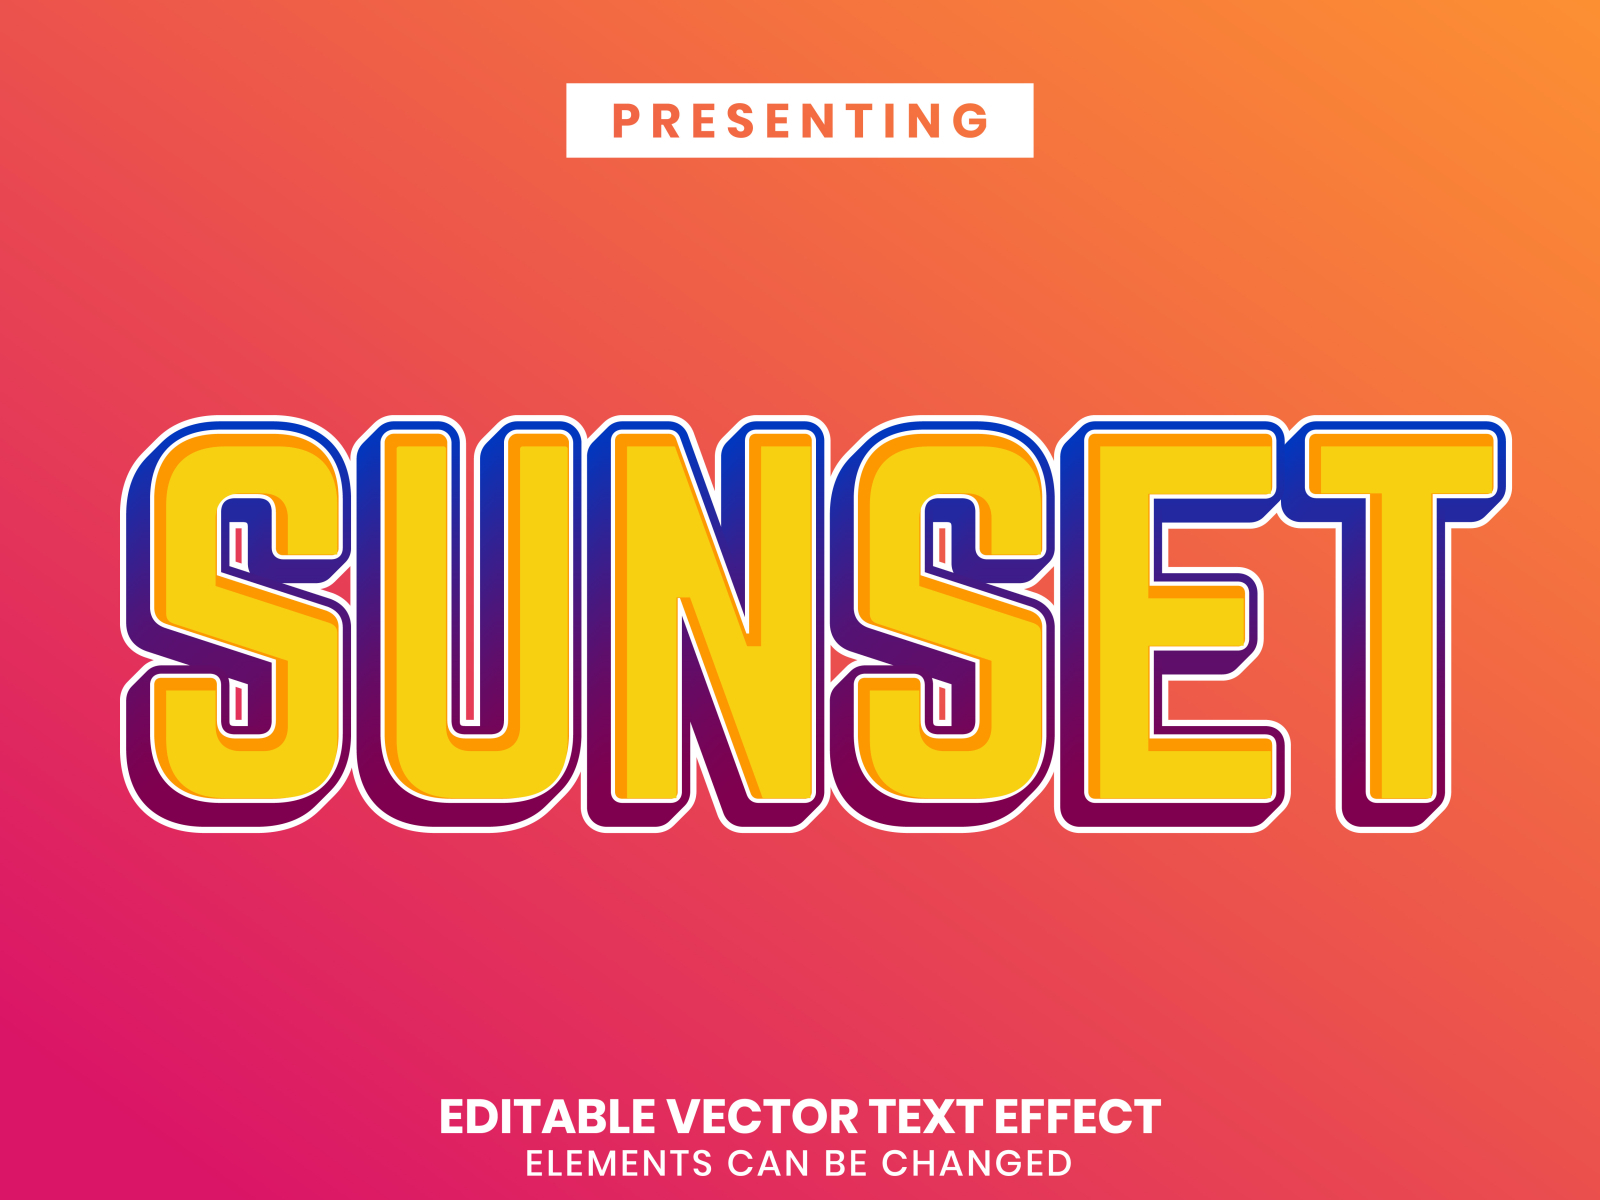 Sunset text effect by Anisyah Farizky on Dribbble